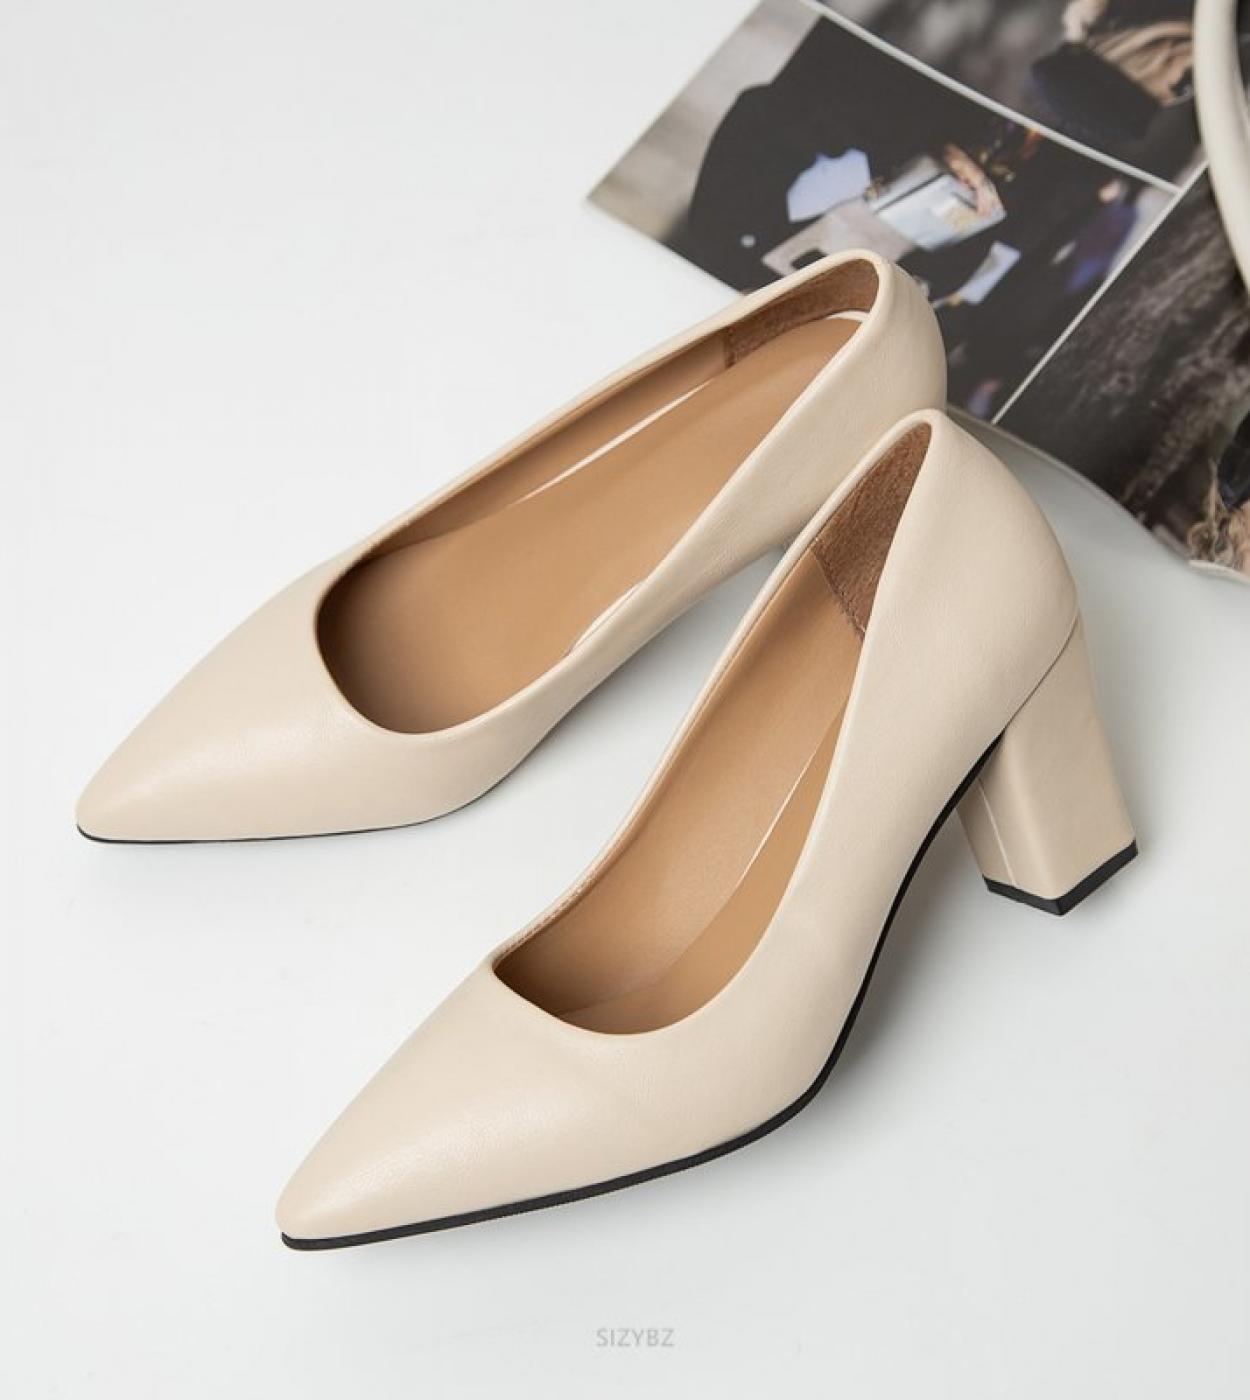 New High Heels Pointed Pumps Women Shoes Closed Shallow Office Square Heel Heels Ladie Dress Party Slipon Comfort Weddin